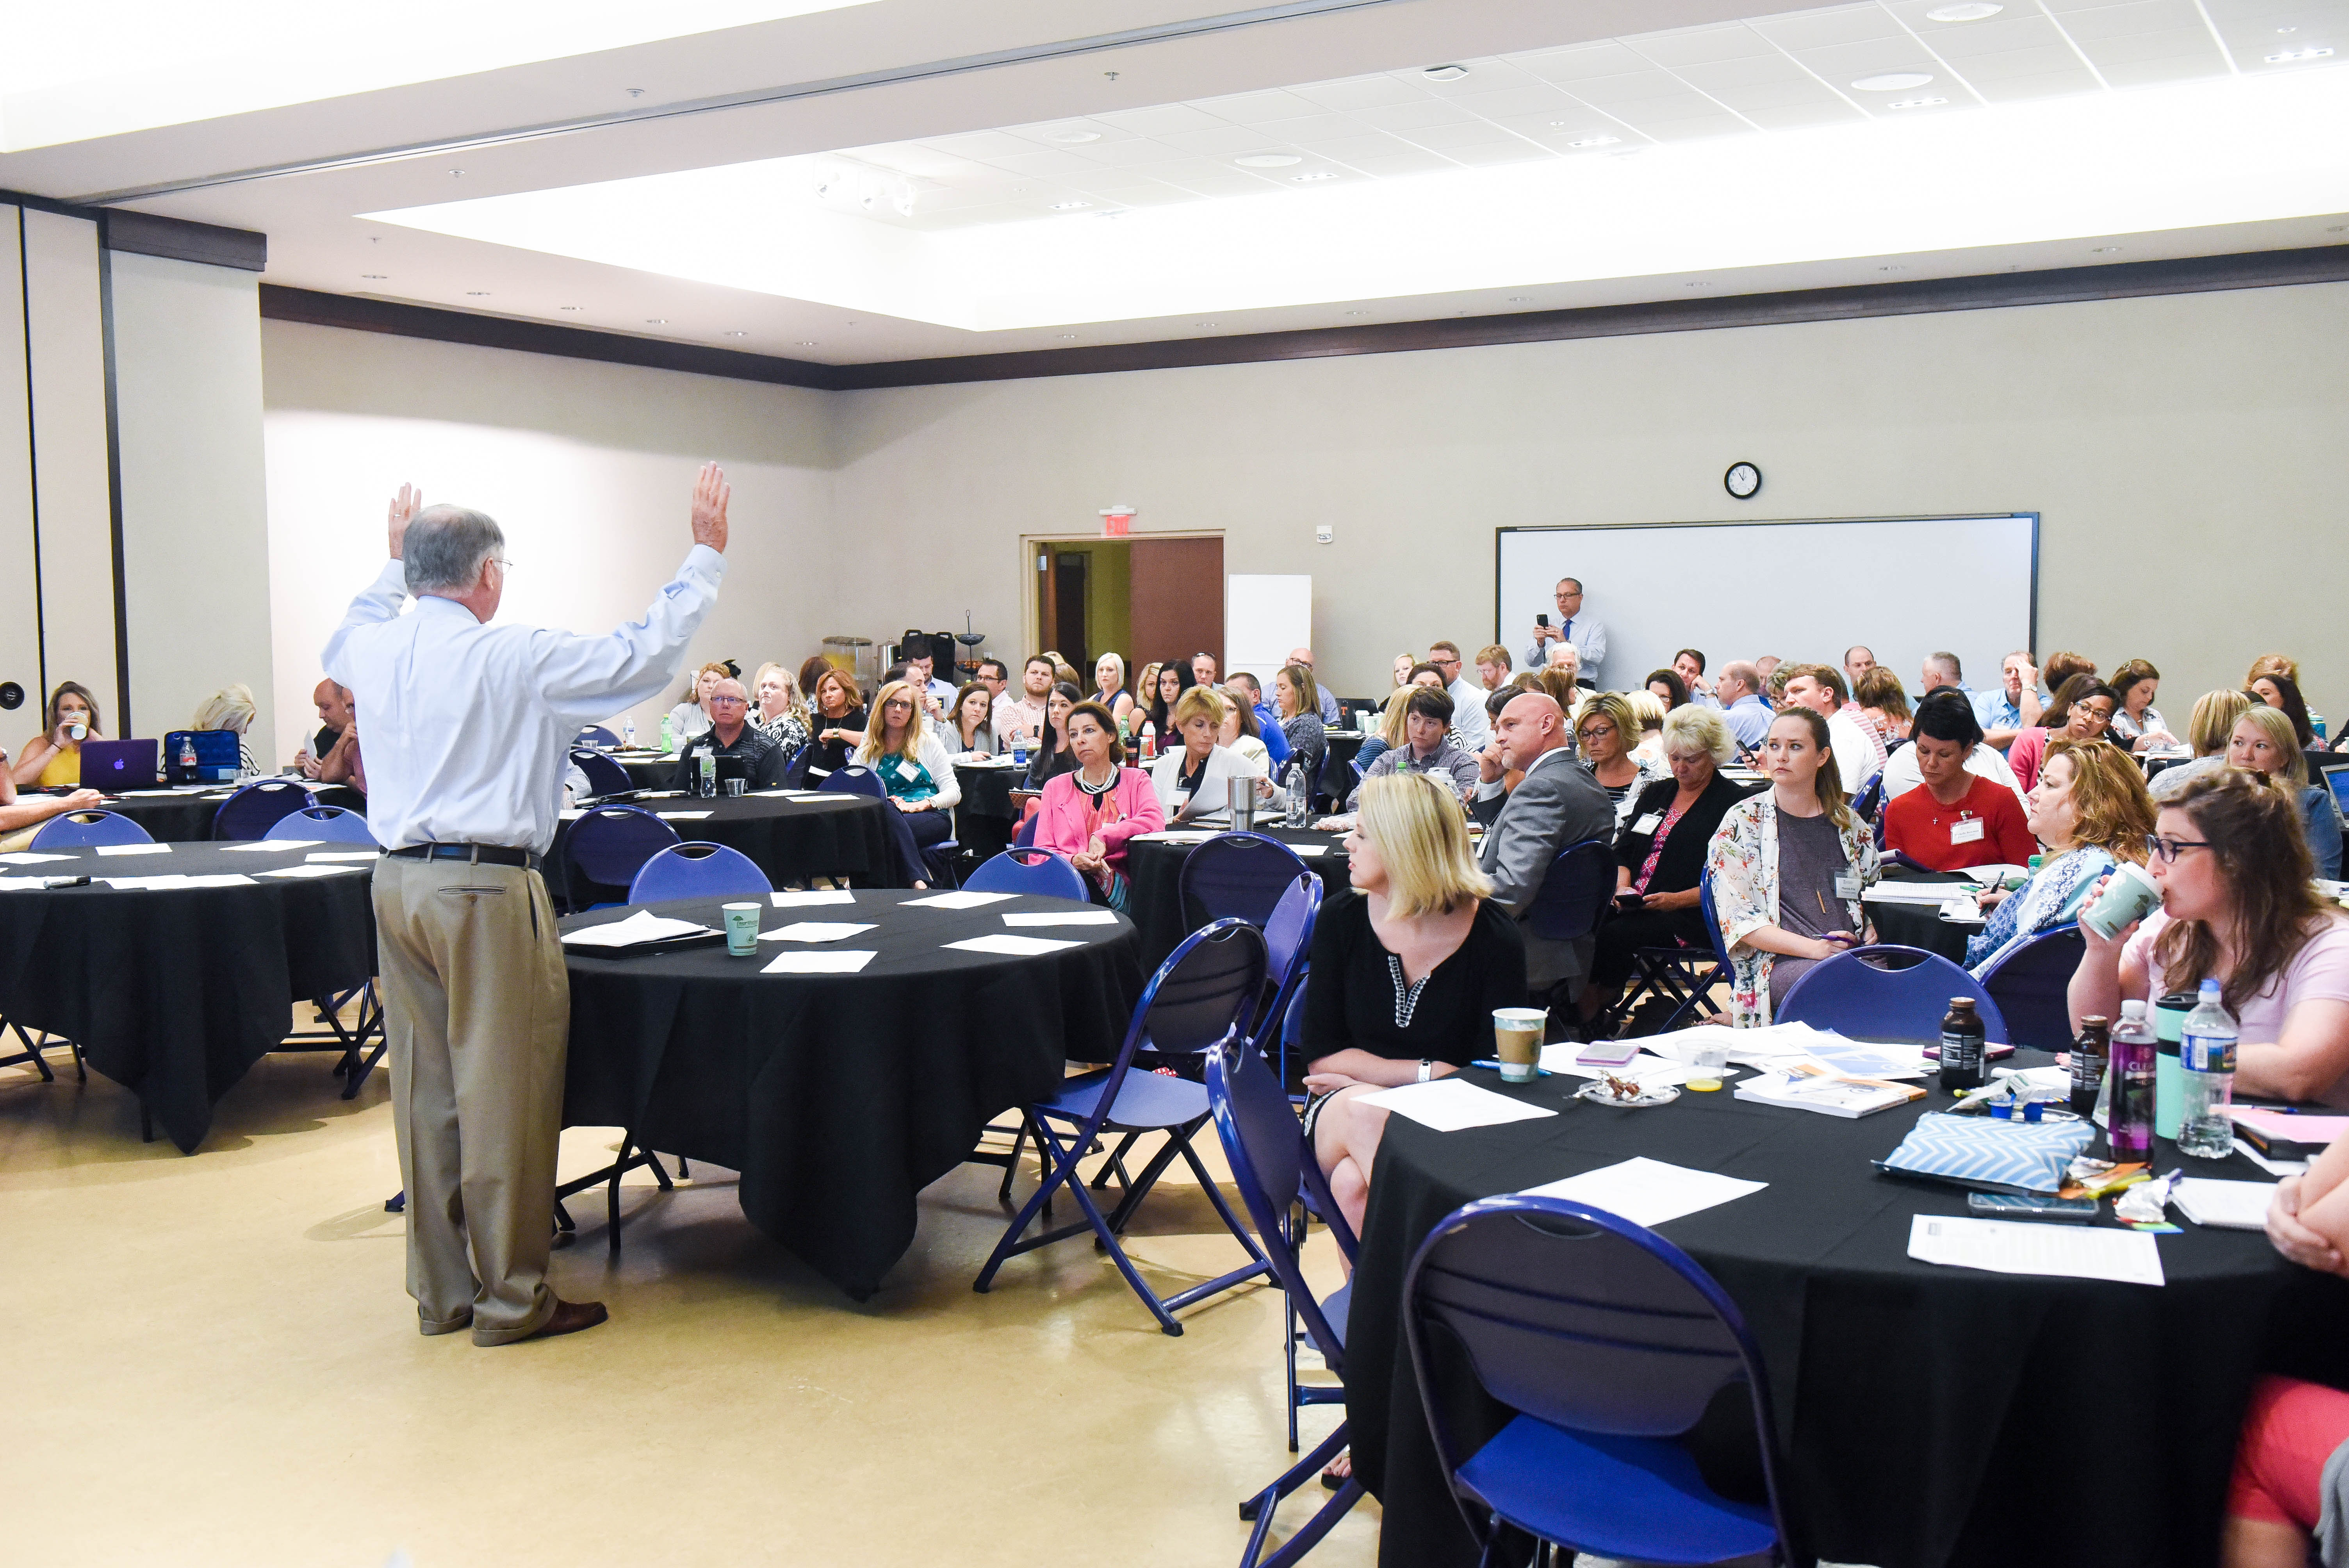 Dr. Jesse Register speaks to area teachers and Administrators during the CIES Emerging Knowledge Forum at Belmont University in Nashville, Tennessee, June 7, 2018.